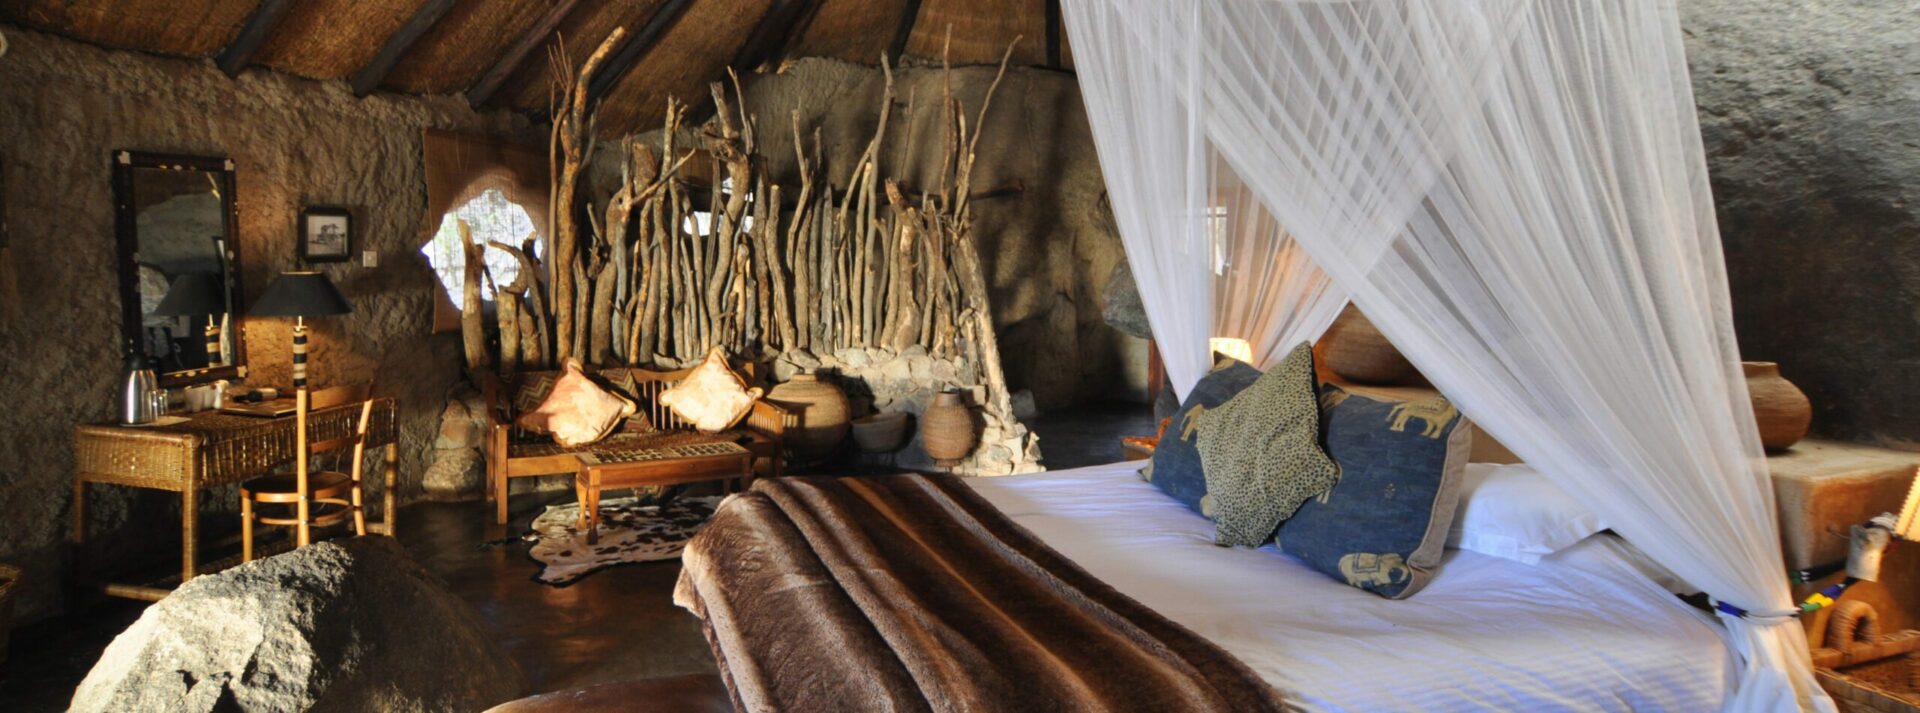 stay in this bedroom built into the rocks at Amalinda in Matobo HIlls on our Zimbabwe safari